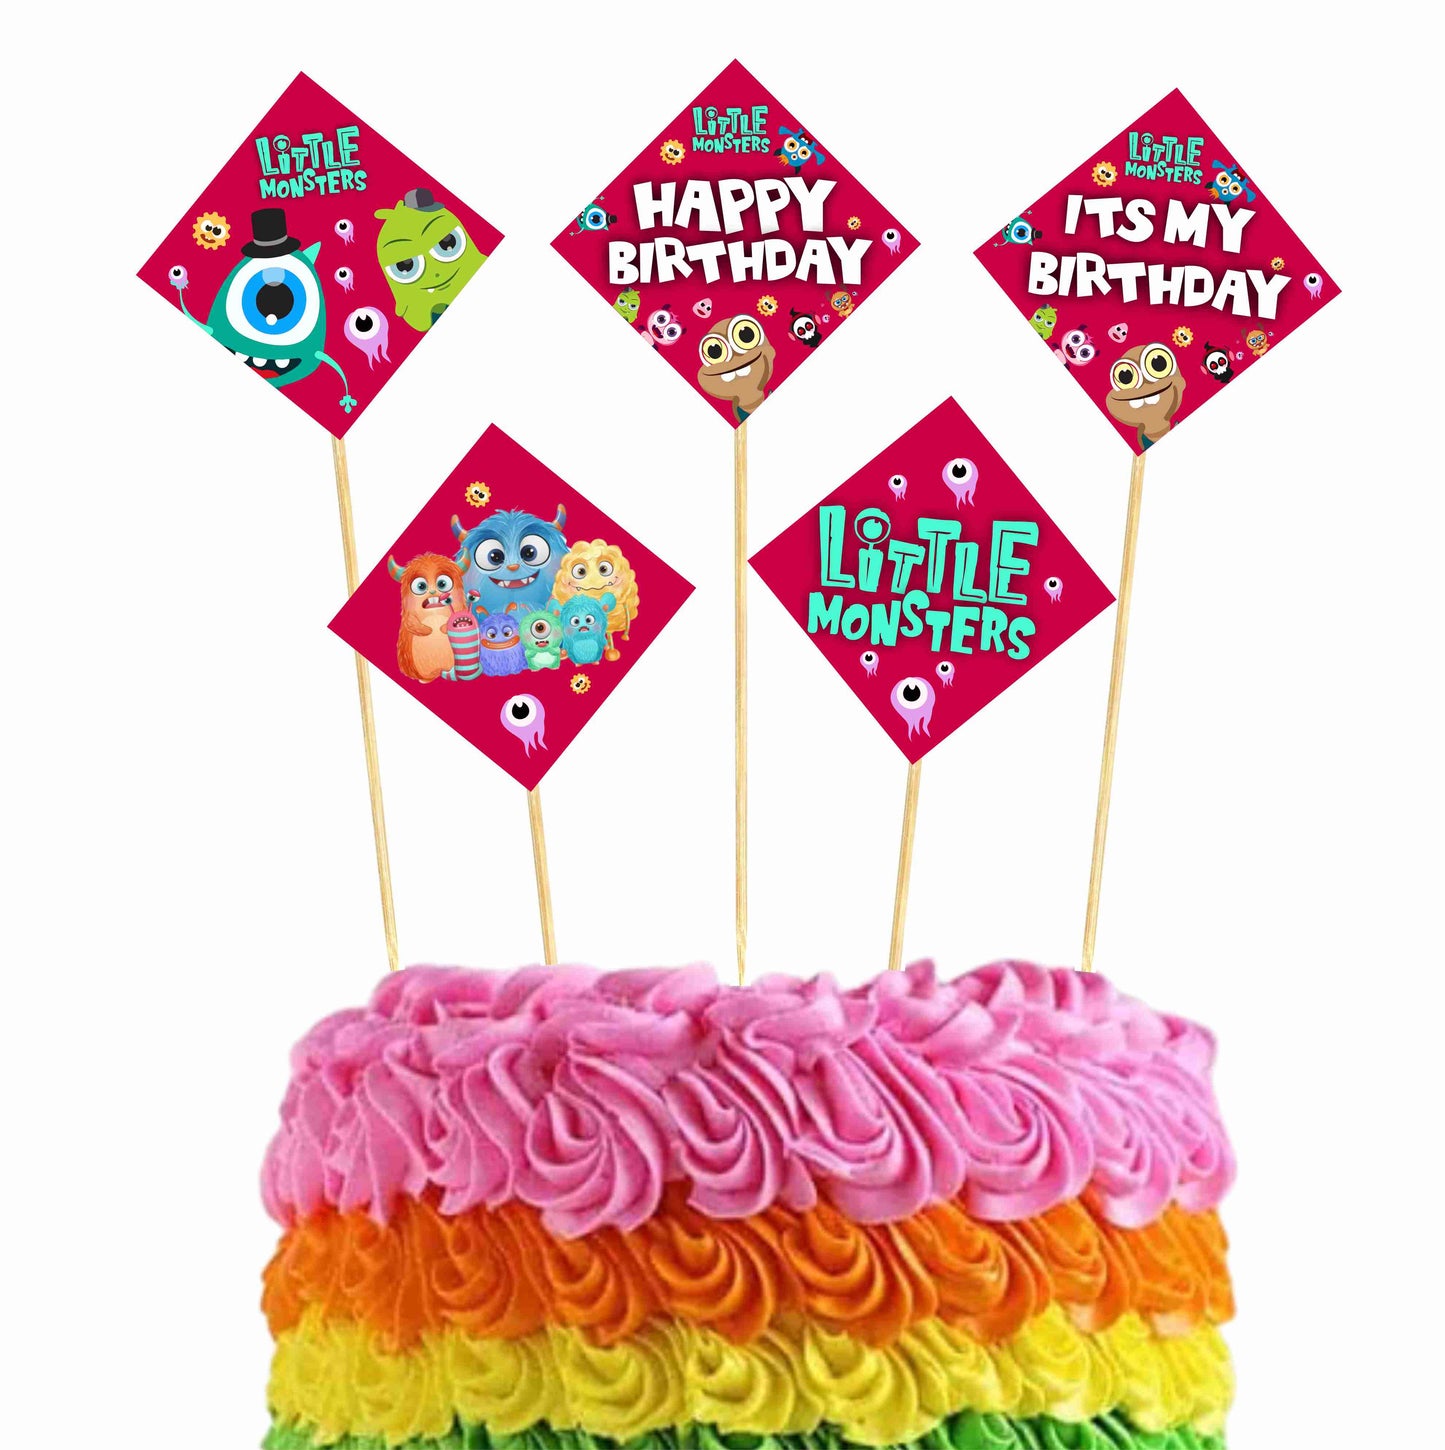 Little Monster Theme Cake Topper Pack of 10 Nos for Birthday Cake Decoration Theme Party Item For Boys Girls Adults Birthday Theme Decor